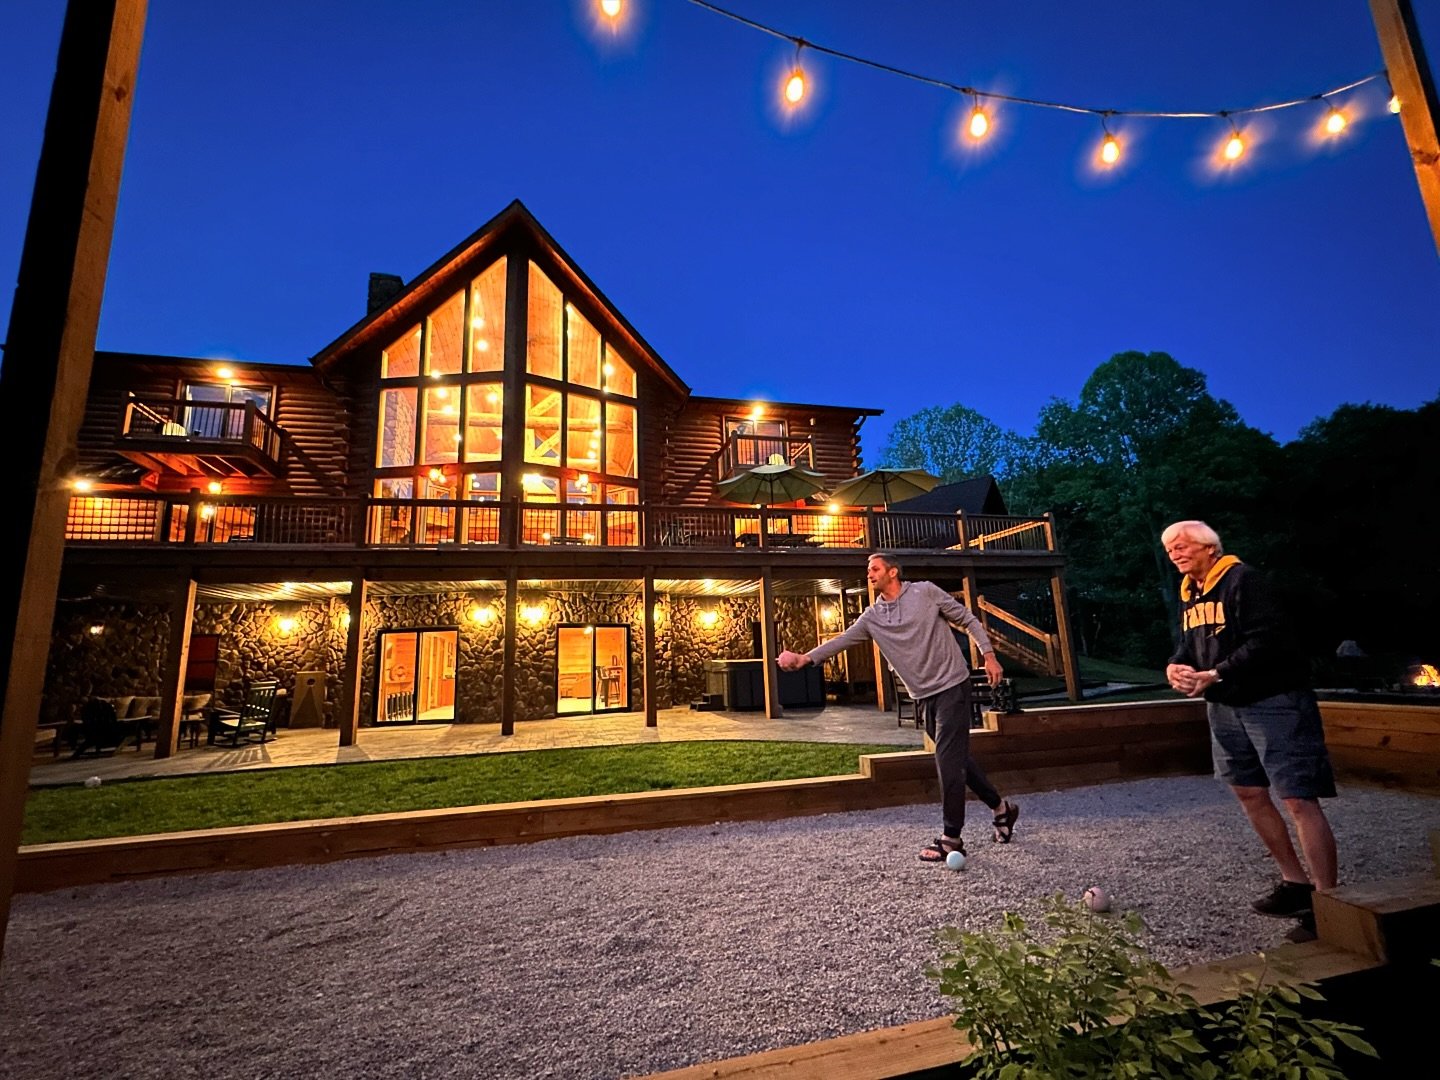 A friendly little game of bocce ball under the string lights - just one of the endless things to do at Golden Acres Lodge🤩